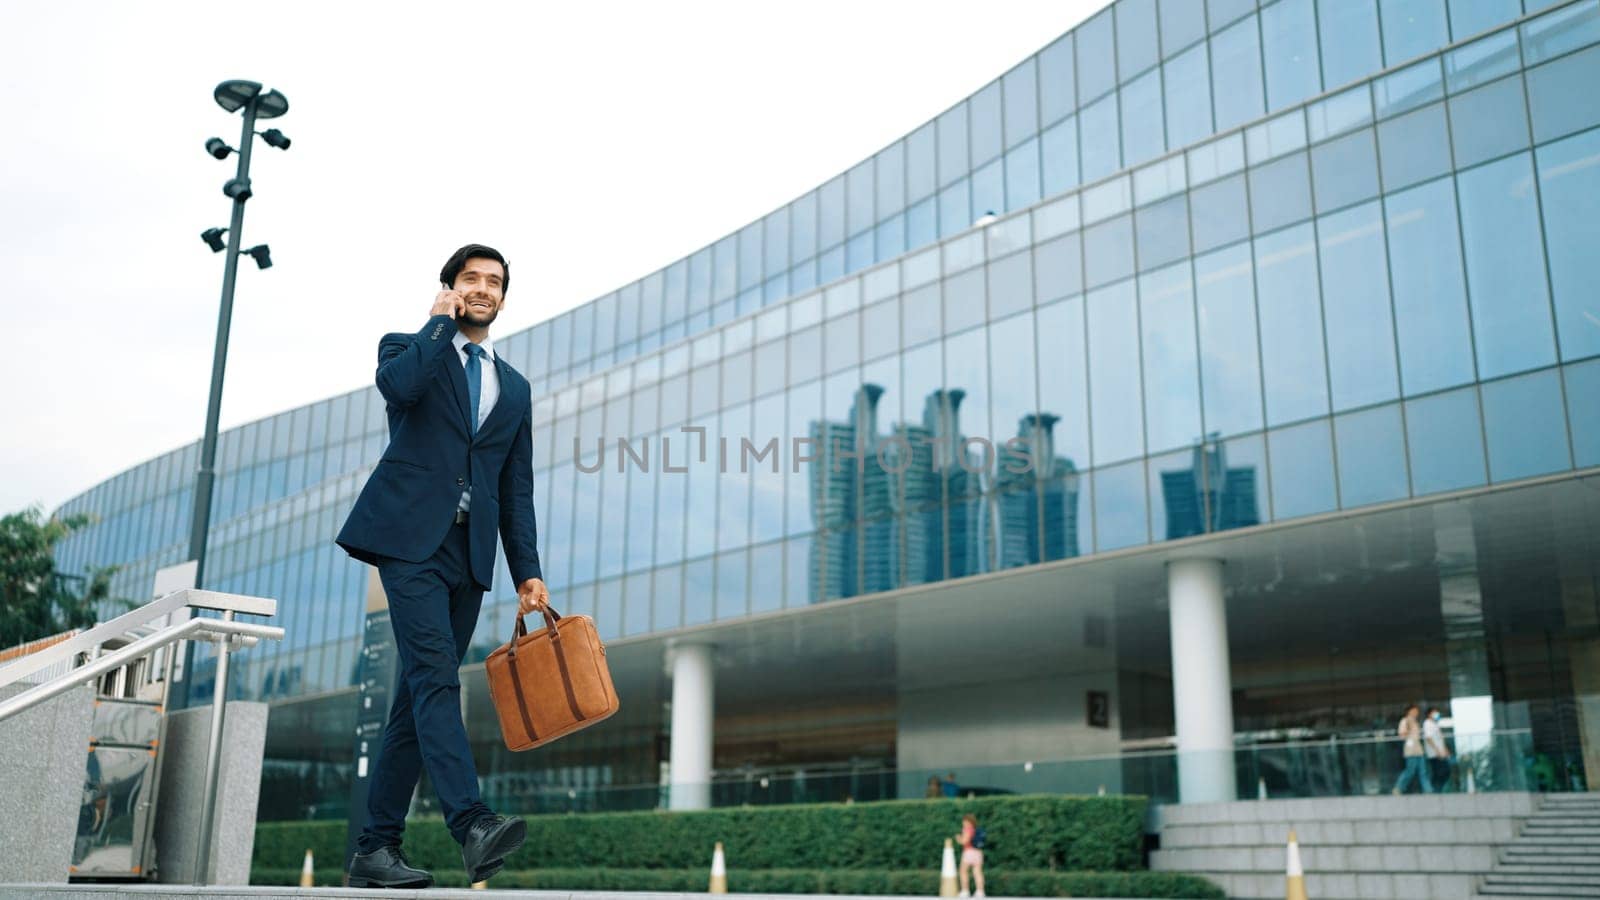 Smart business man using phone to talking while walking at building. Happy manager walking at street while talking on smart phone to discuss business plan or marketing strategy or working. Exultant.